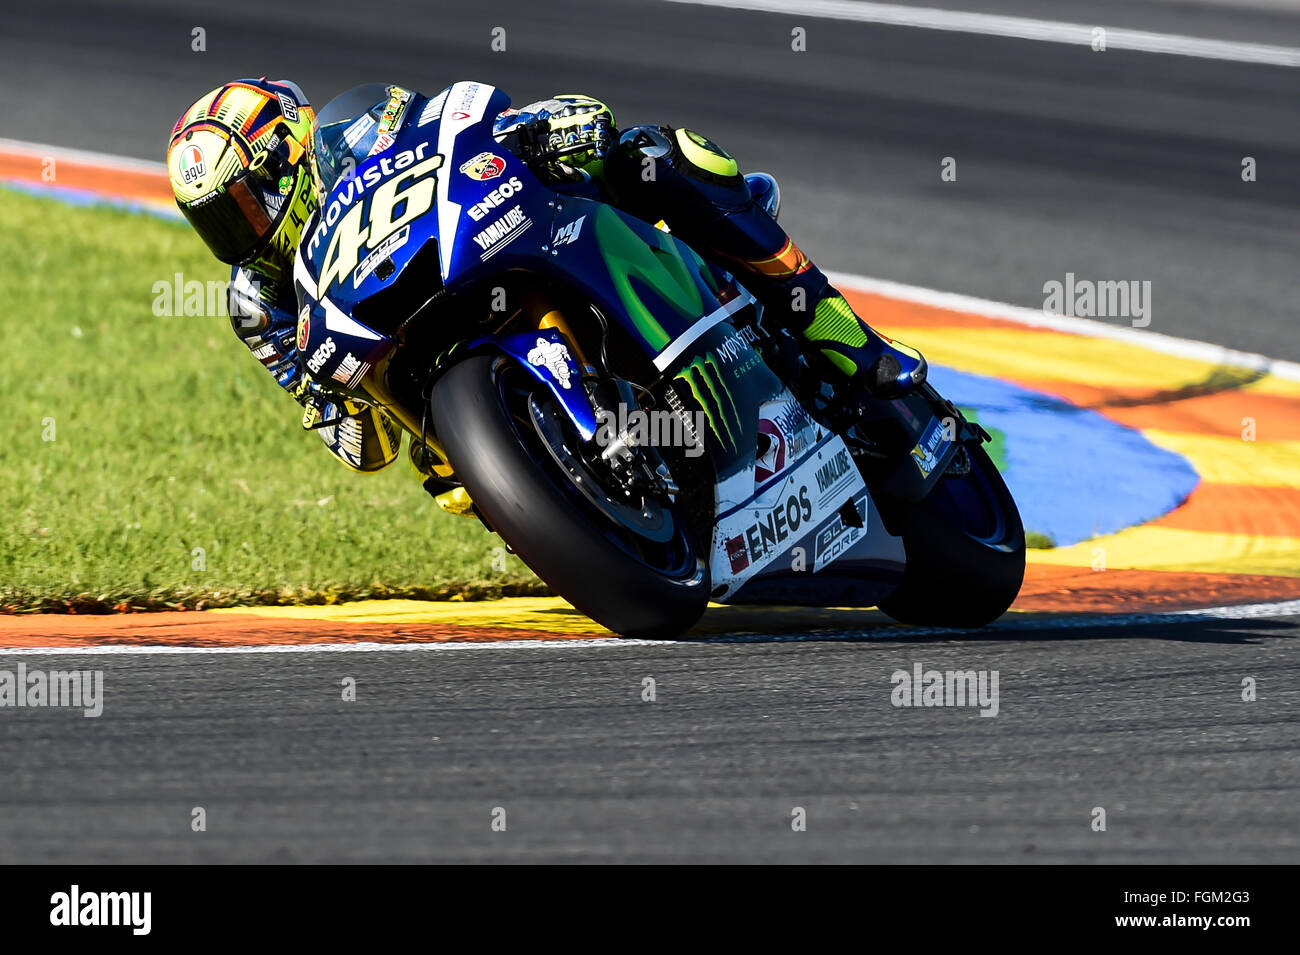 Valentino Rossi in action during Motogp winter test Stock Photo - Alamy